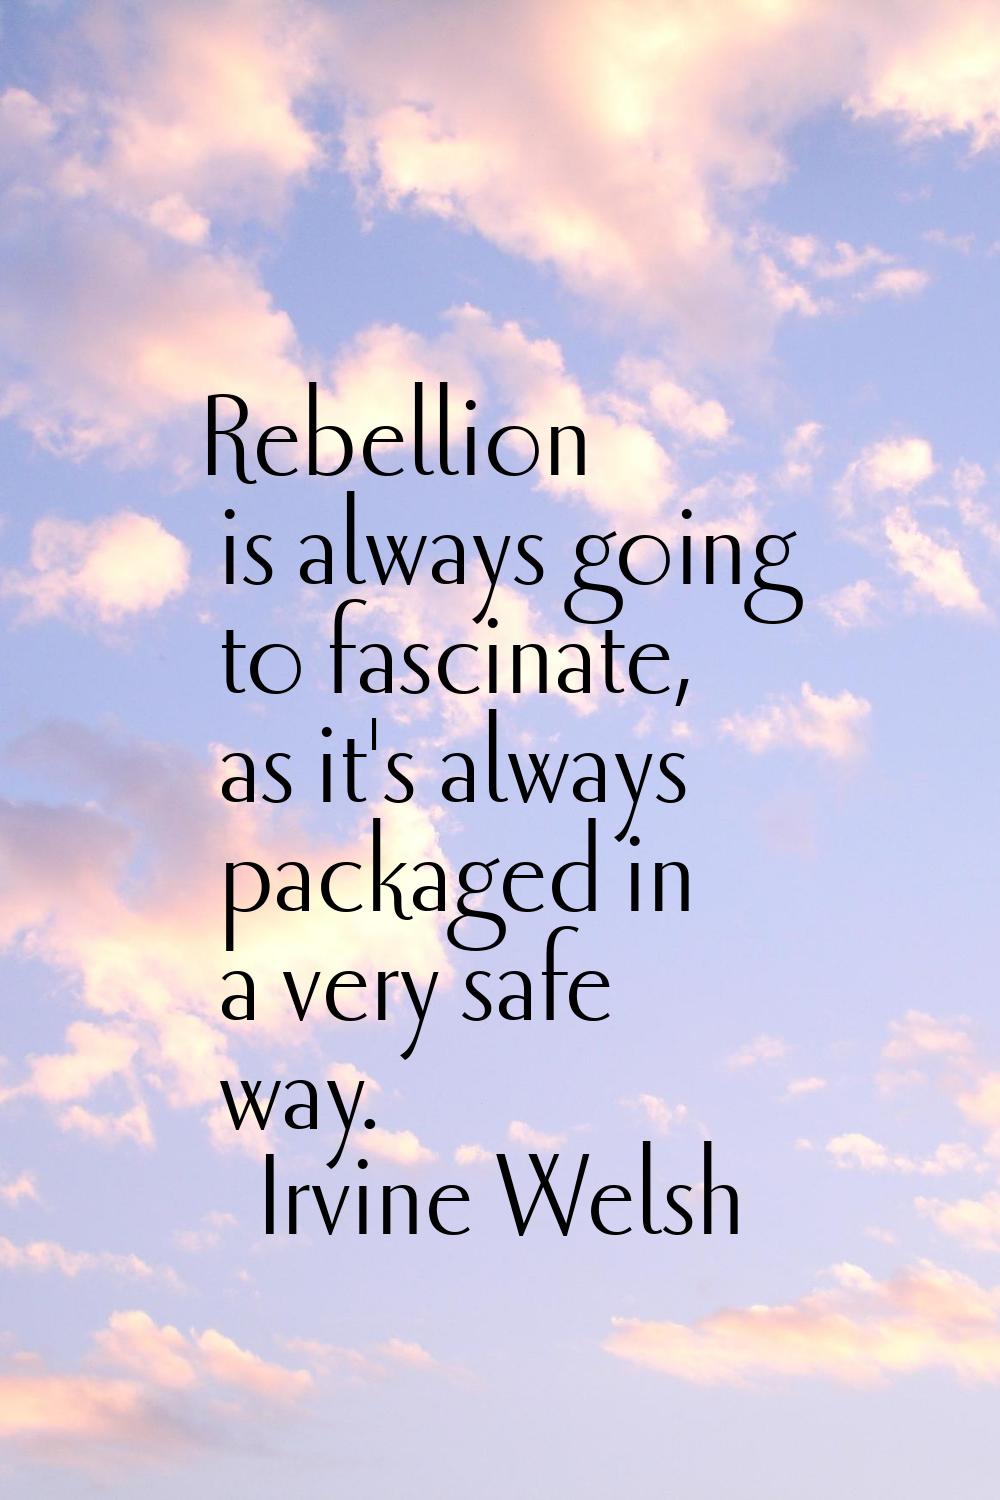 Rebellion is always going to fascinate, as it's always packaged in a very safe way.